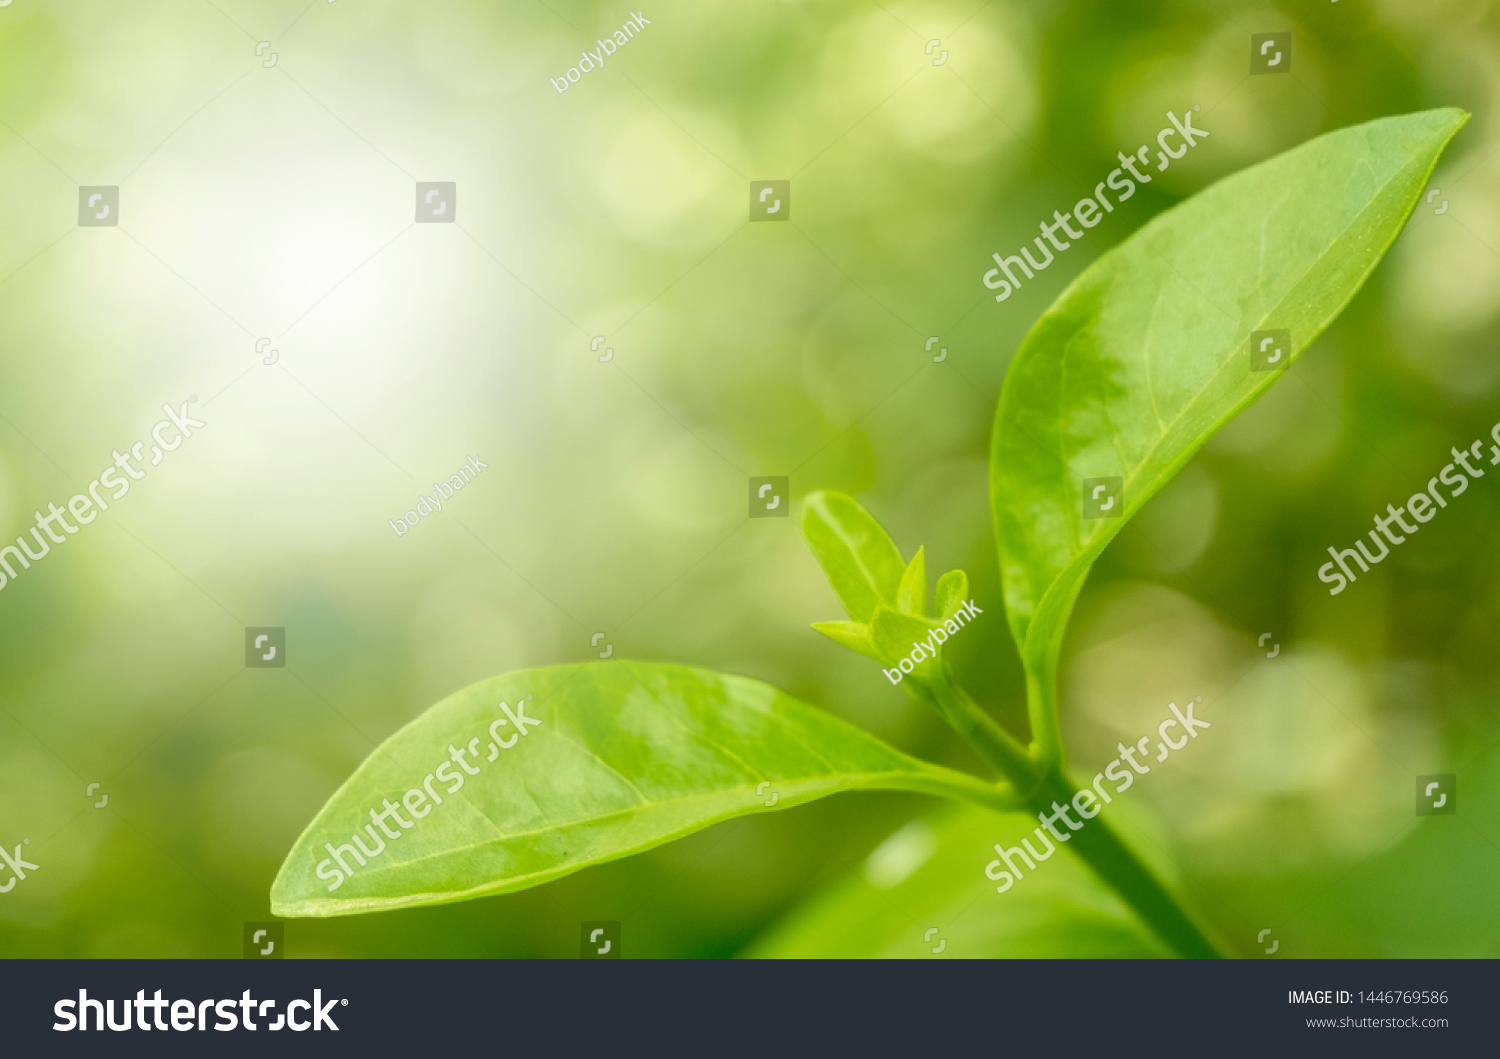 Closeup nature view of green leaf on blurred greenery background in garden with copy space using as background natural green plants landscape, ecology. Blurred green bokeh nature abstract background #1446769586